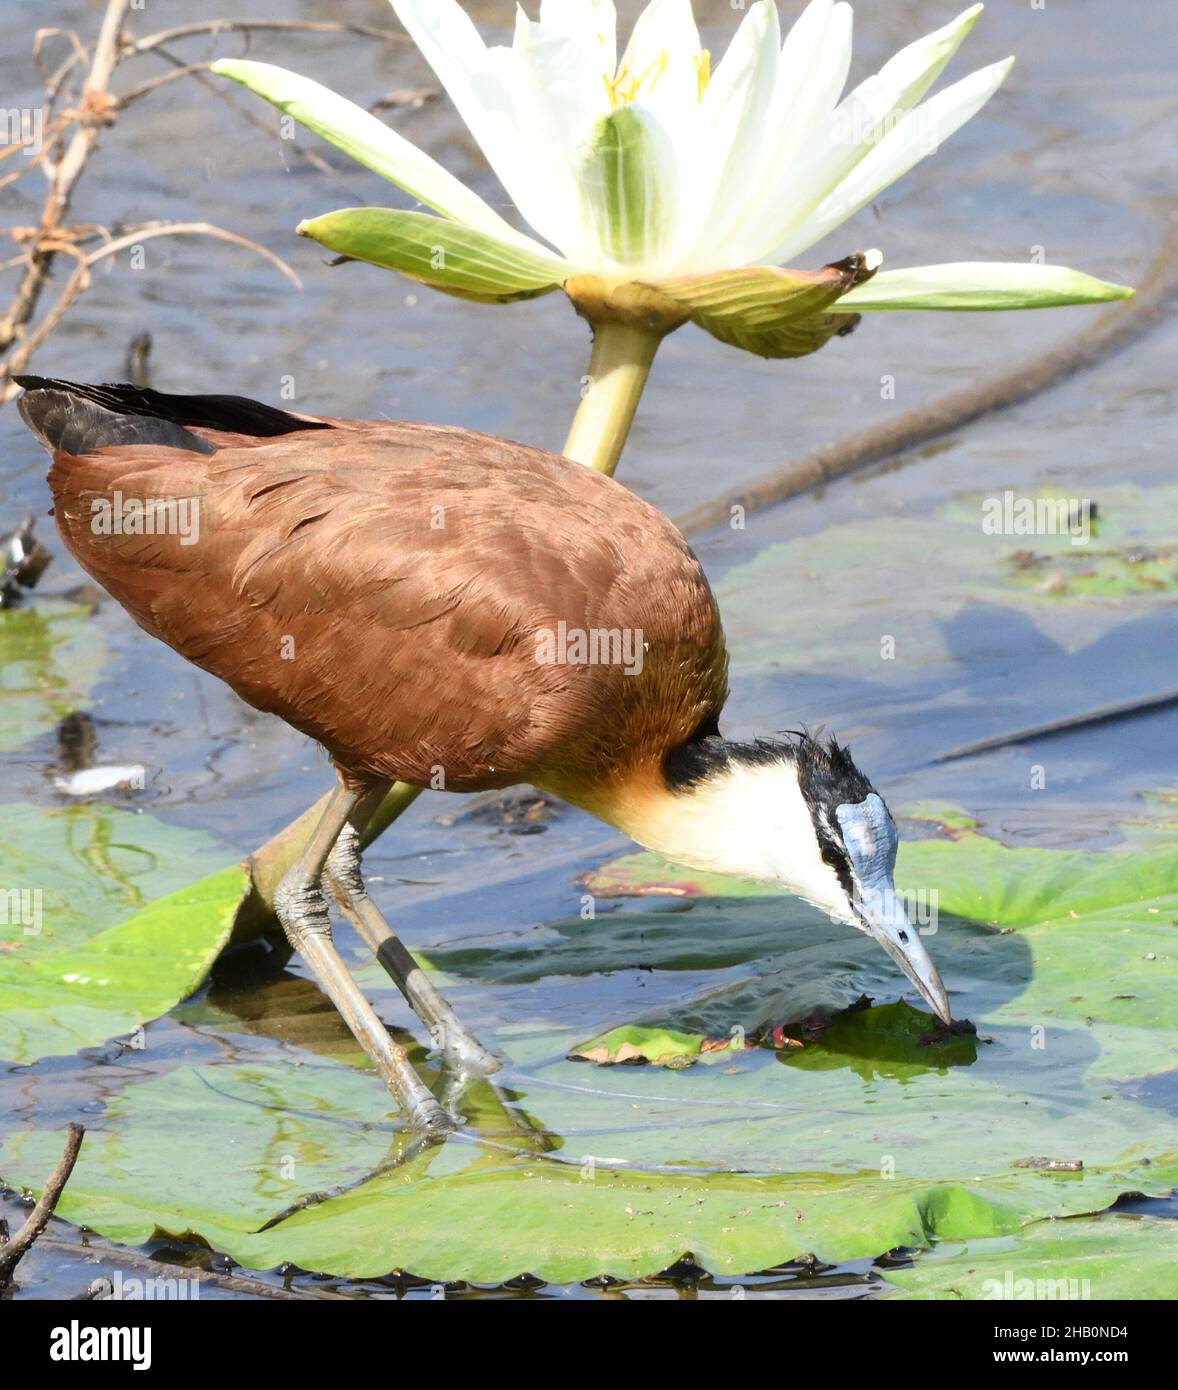 An African jacana (Actophilornis africanus) looking for invertebrate food uses its extraordinarily long toes to spread its weigh as it walks across wa Stock Photo